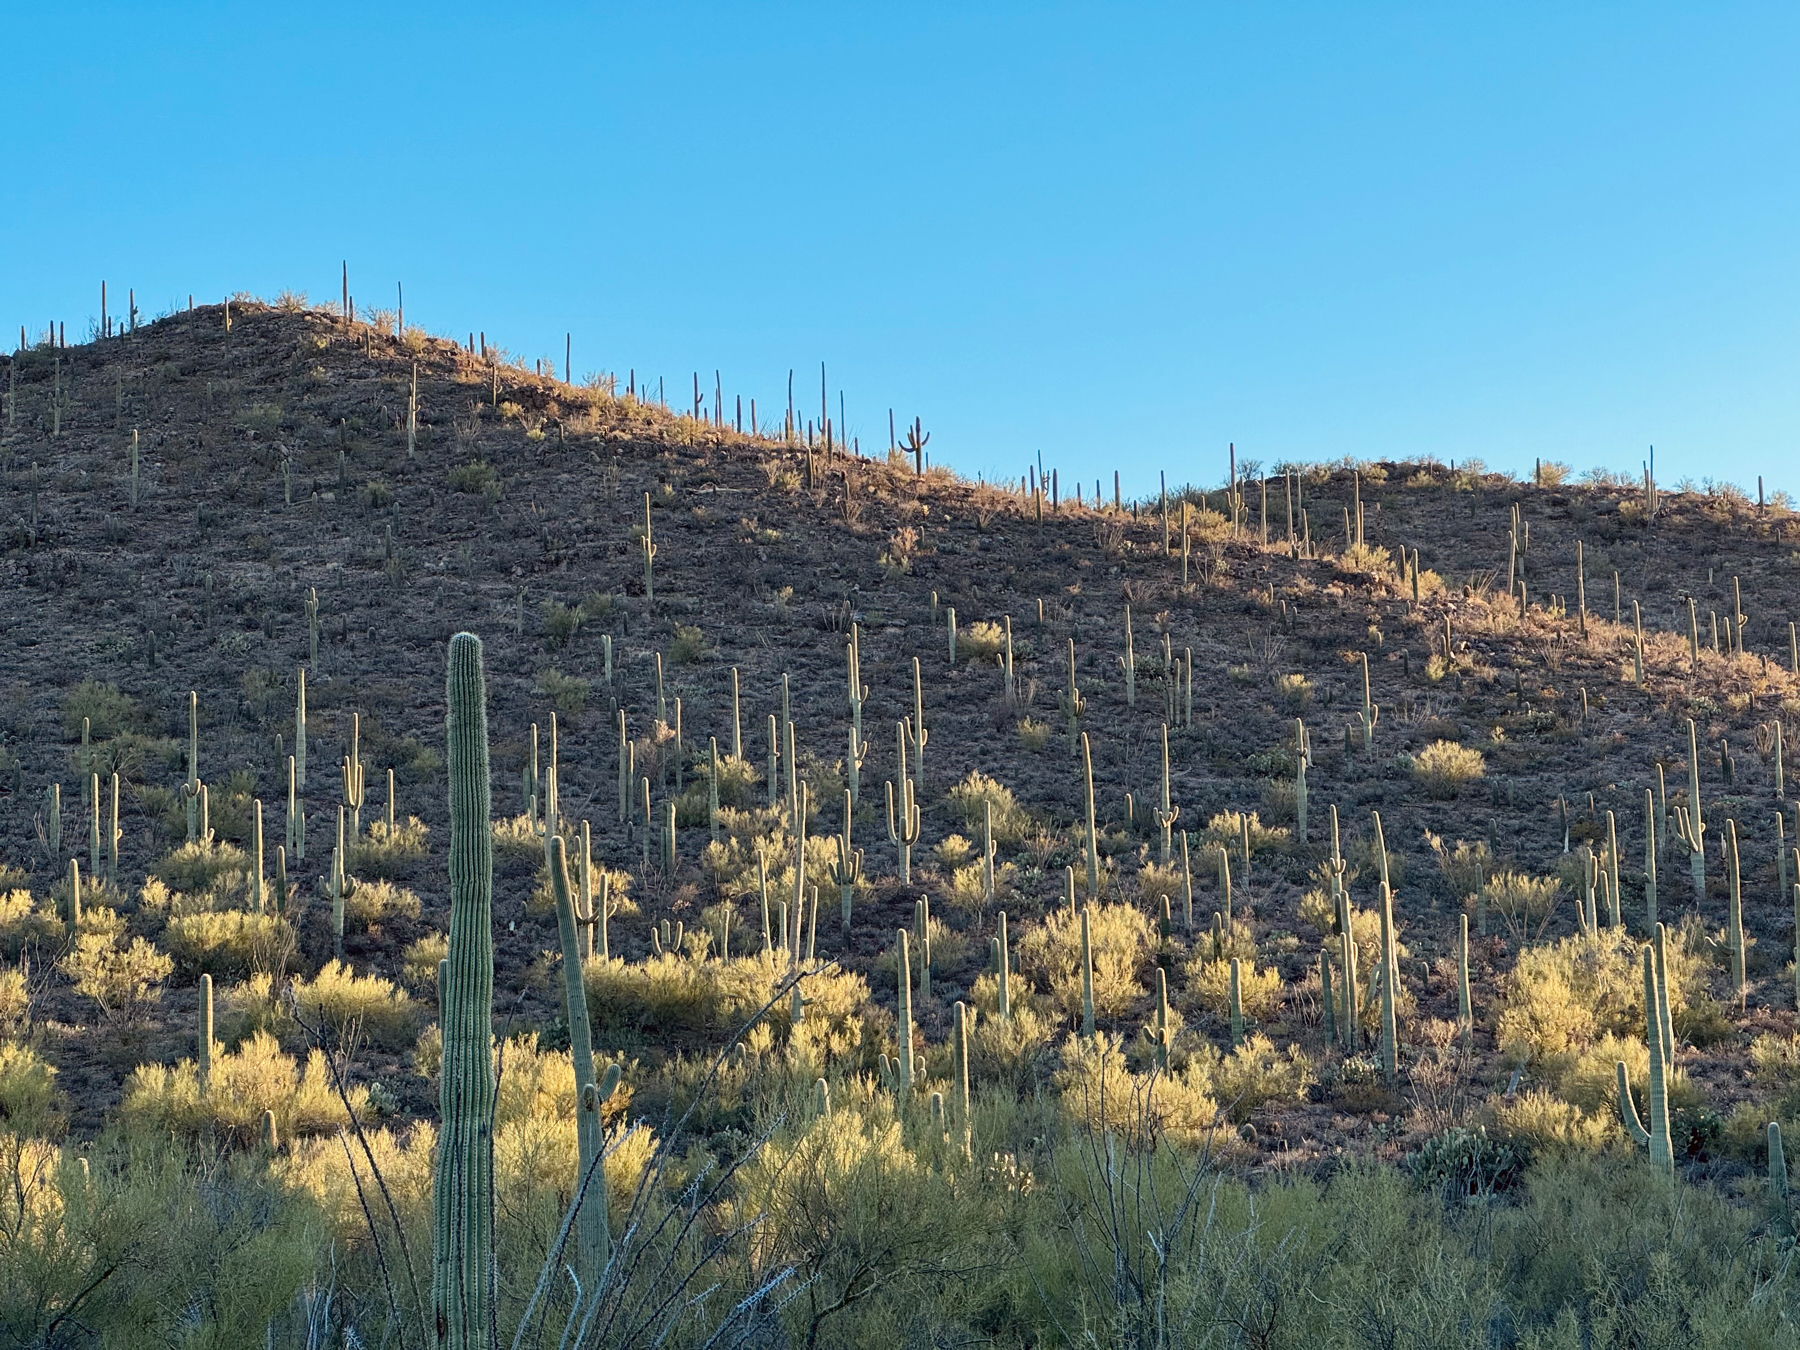 Desert hillside covered in numerous saguaro cacti lit by the light of the setting Sun, with clear blue sky above.